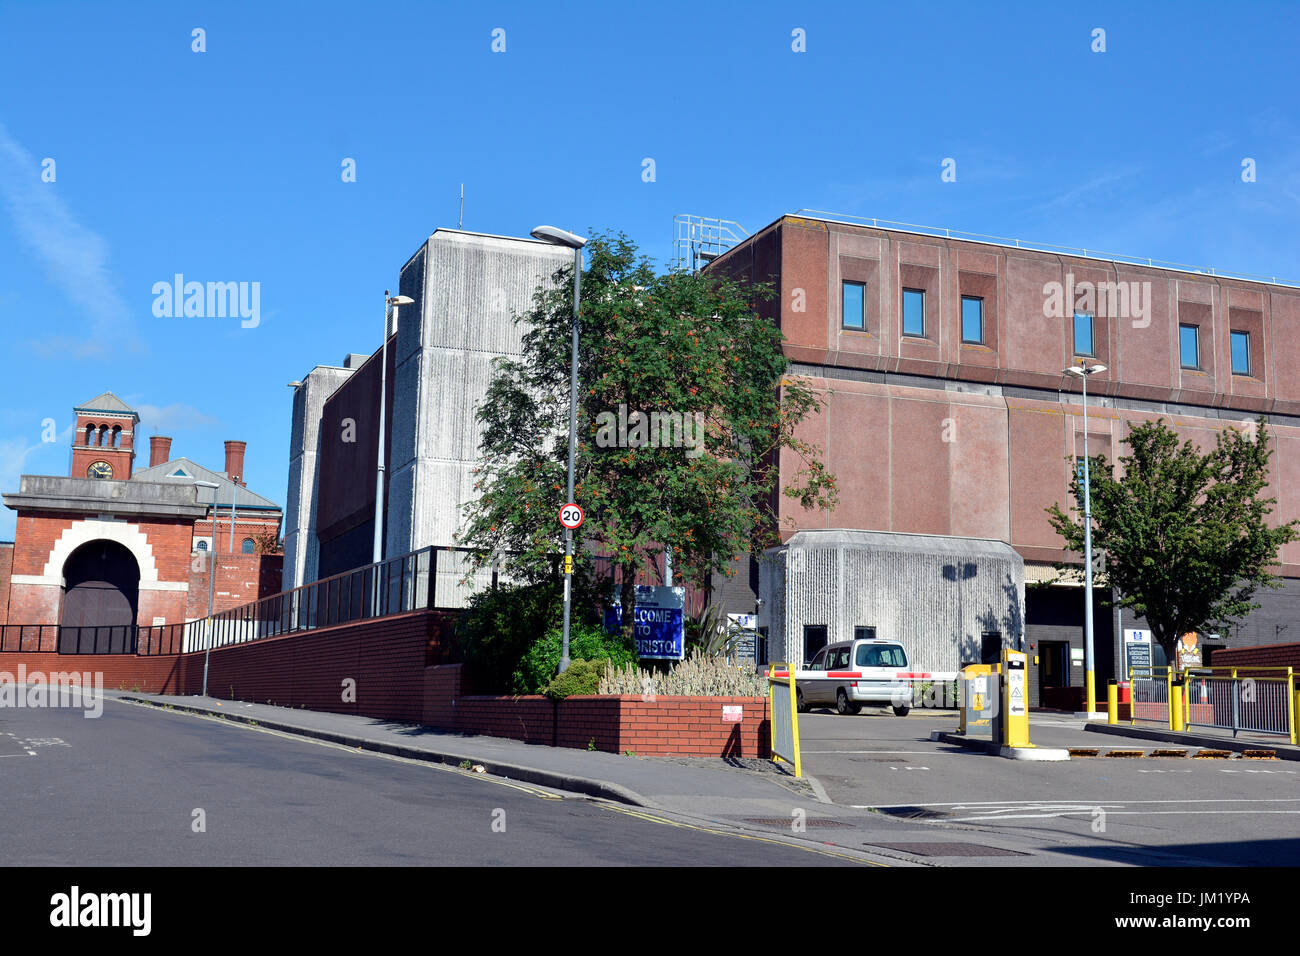 Bristol, UK. 25th July, 2017. Breaking..Total chaos at Horfield Prison in Bristol, outbreak of cockroaches, drugs, violence, suicides and over crowding. Problems hinge on major shortage of staff and under investments, all this leads to dangers to officers and prison inmates. Credit: Robert Timoney/Alamy Live News Stock Photo